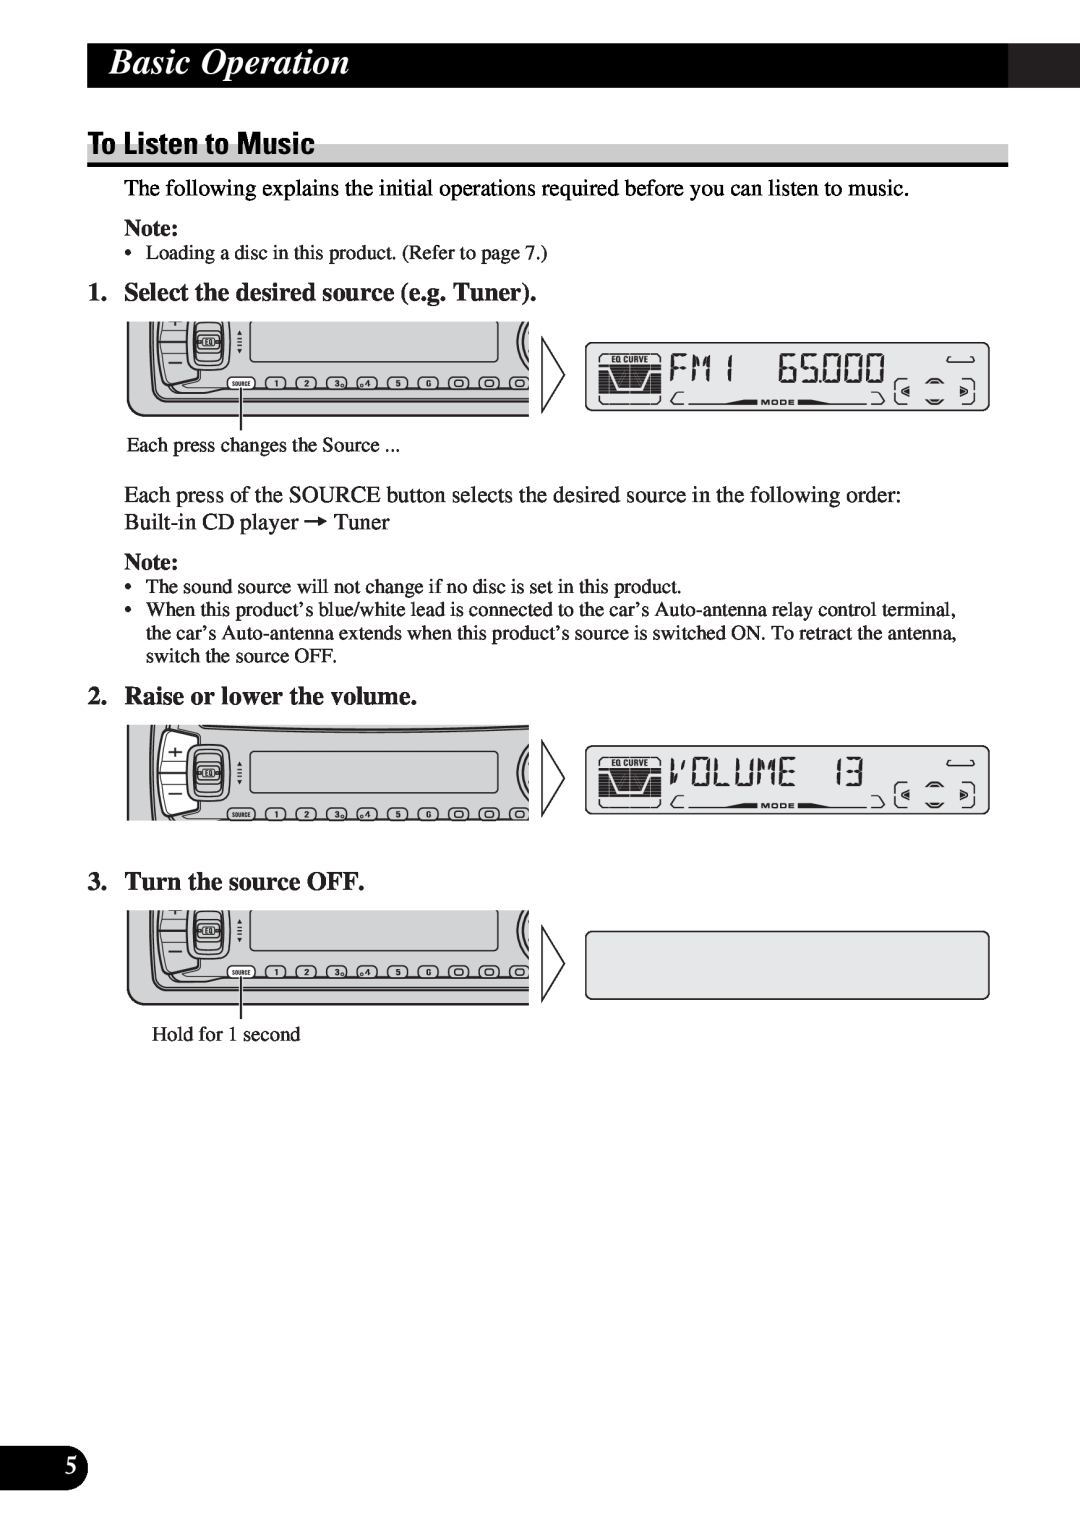 Pioneer DEH-3110 operation manual Basic Operation, To Listen to Music, Select the desired source e.g. Tuner 